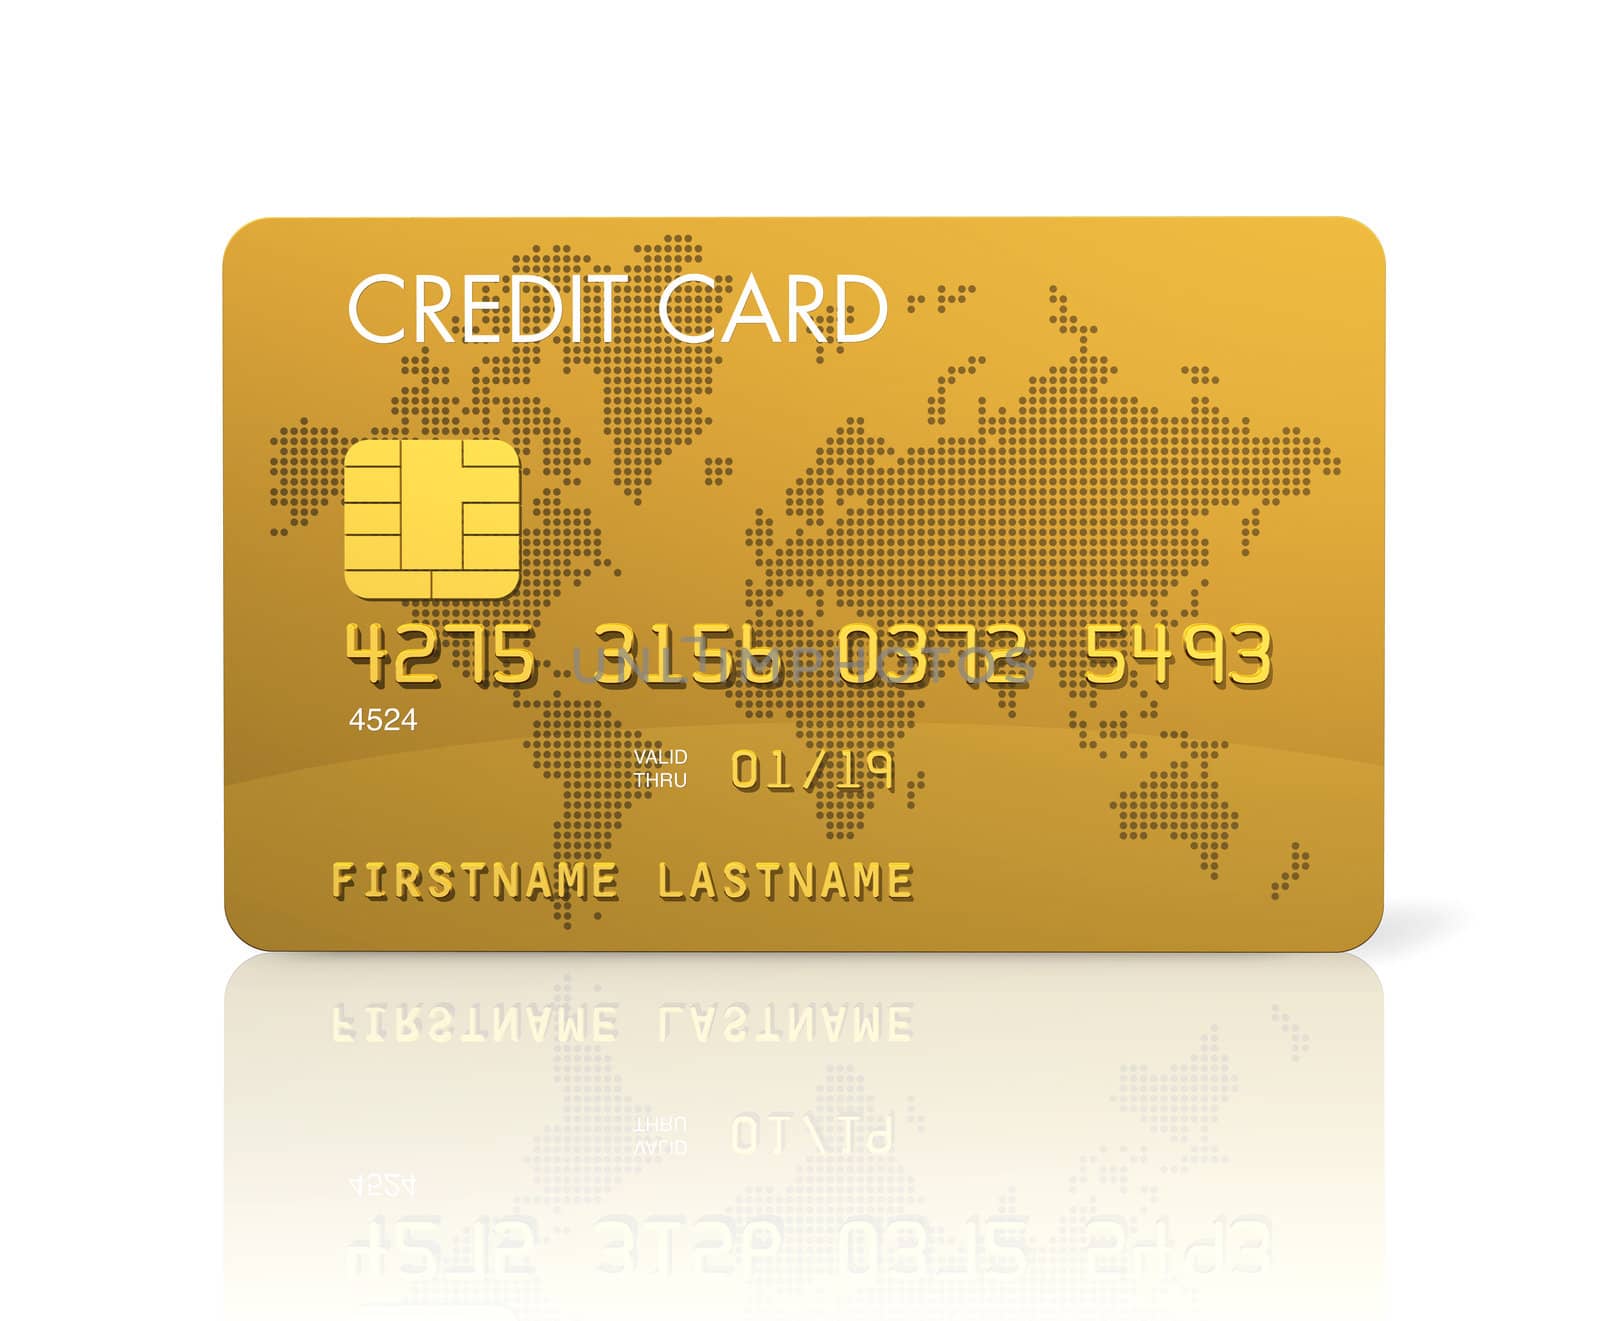 Gold credit card, 3D render isolated on white